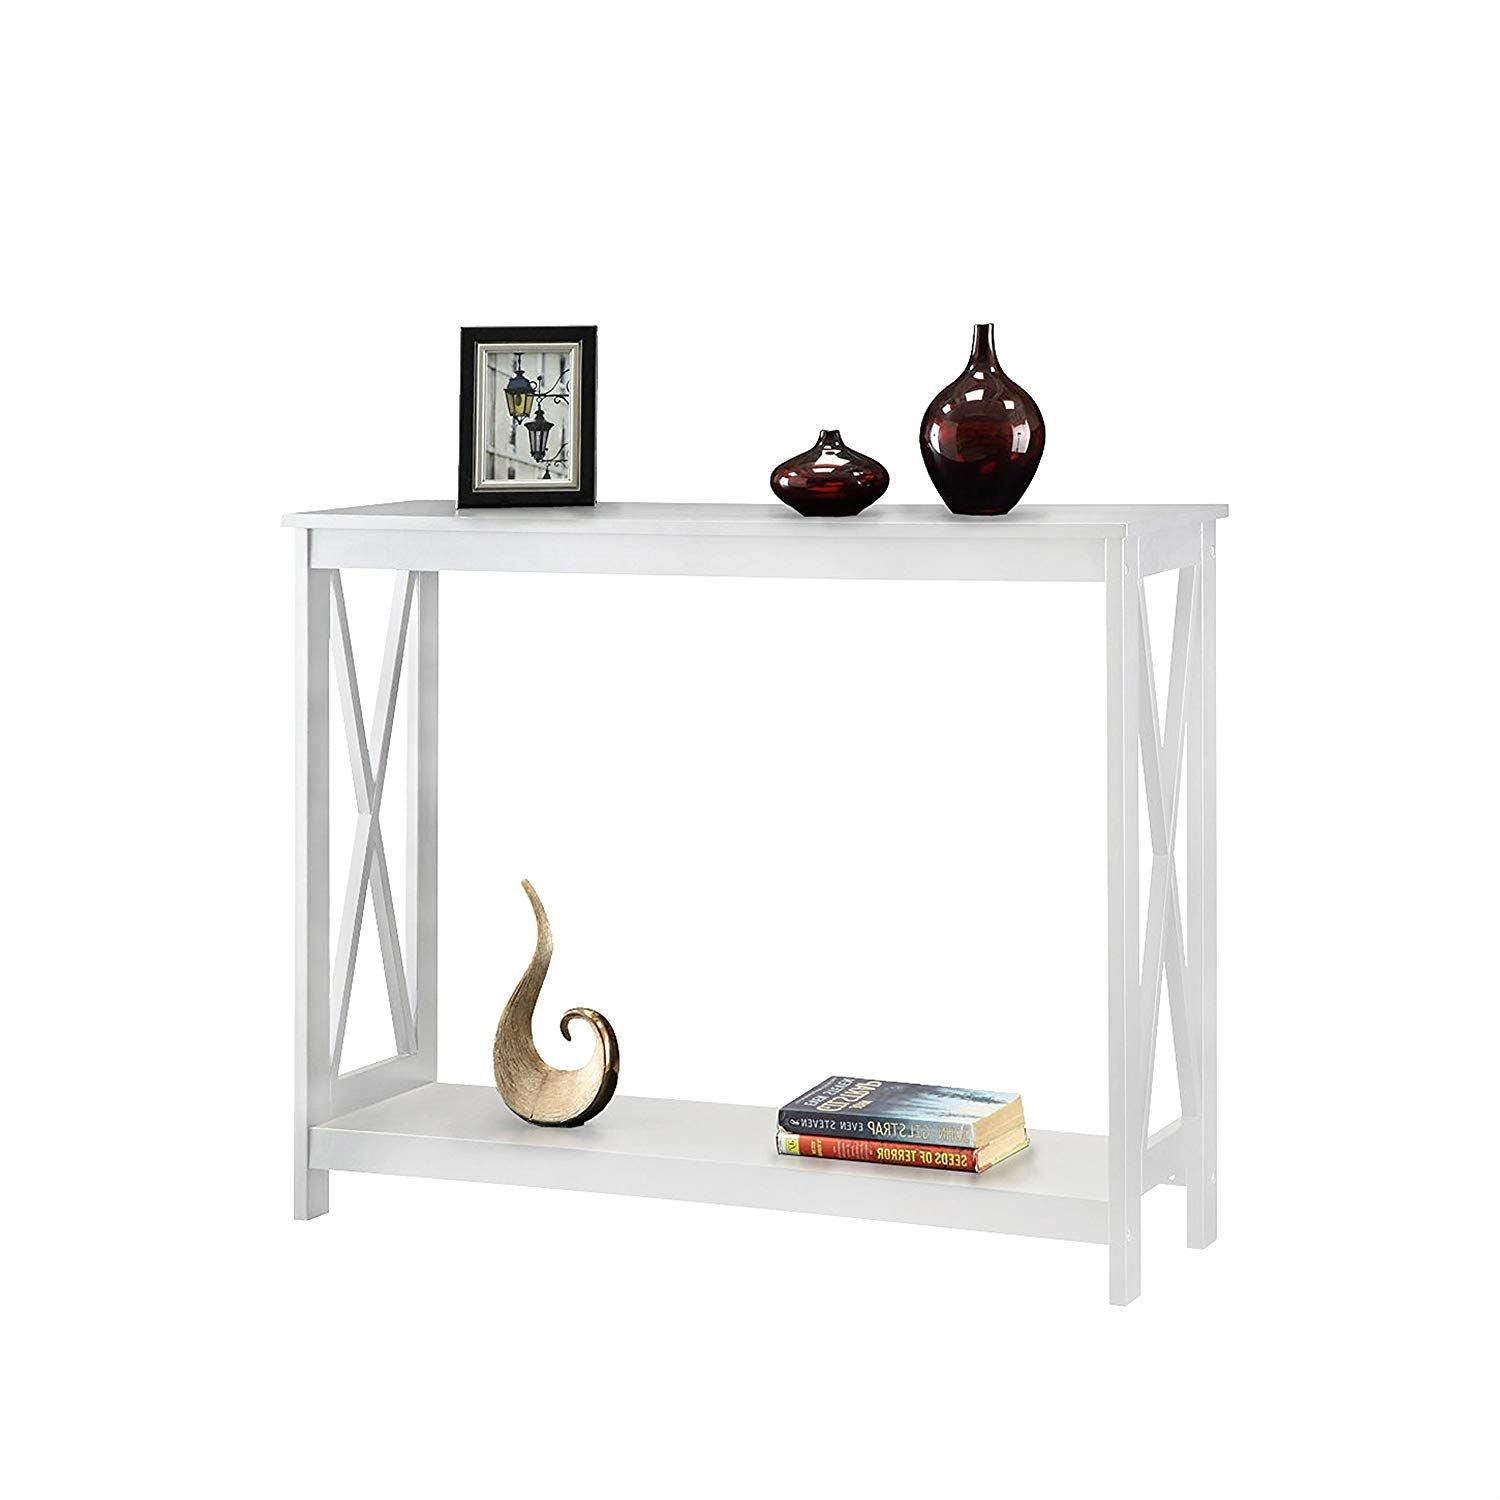 Living Room > Console & Sofa Tables - White Wood Console Sofa Table With Bottom Storage Shelf